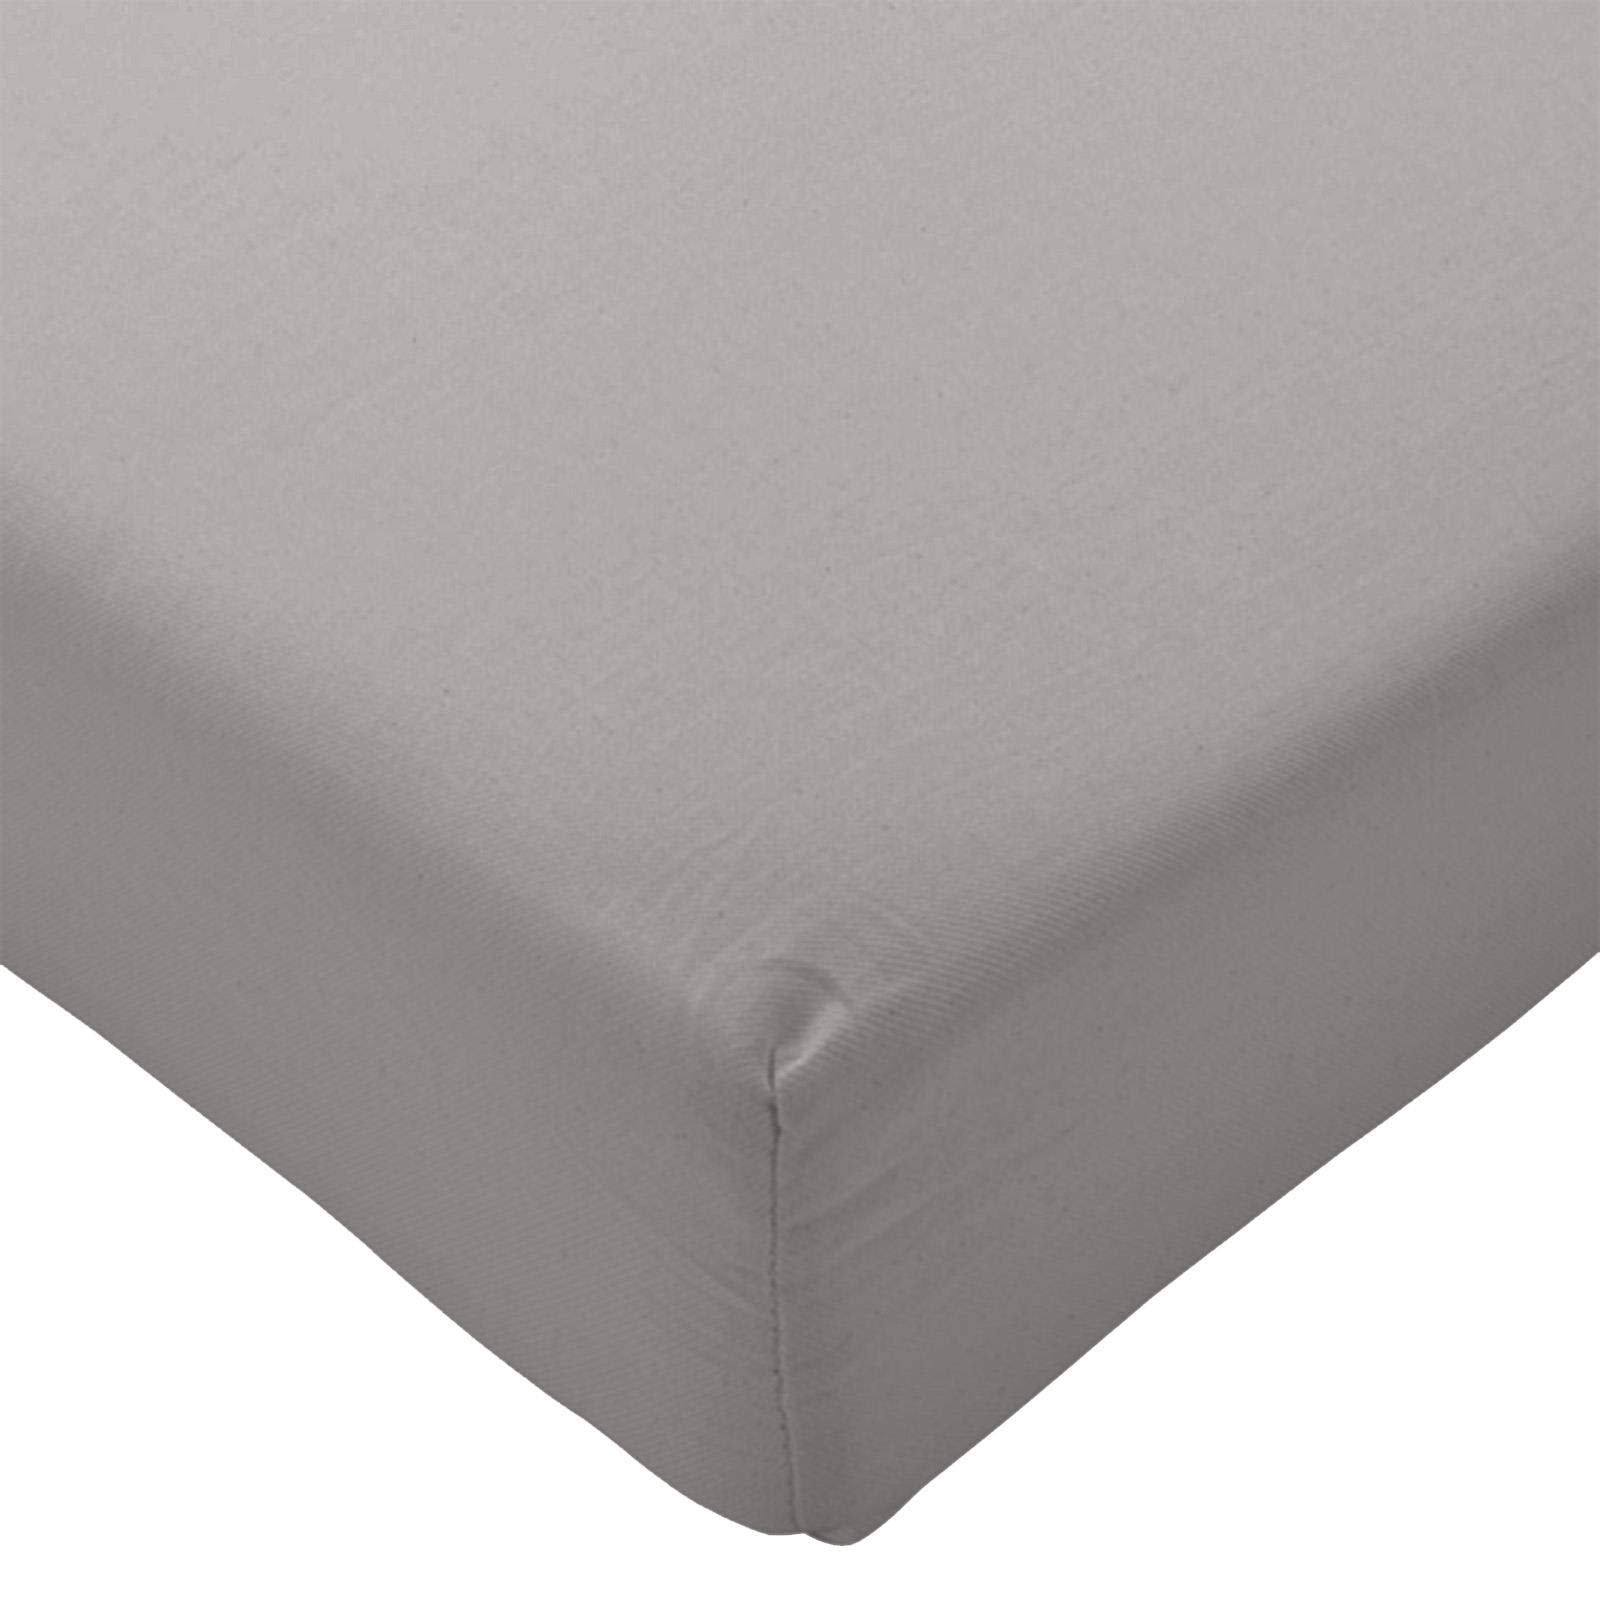 Highams Luxury Hotel Style Fitted Bed Sheet Polycotton Easy Care Bedding, Silver Grey - Single